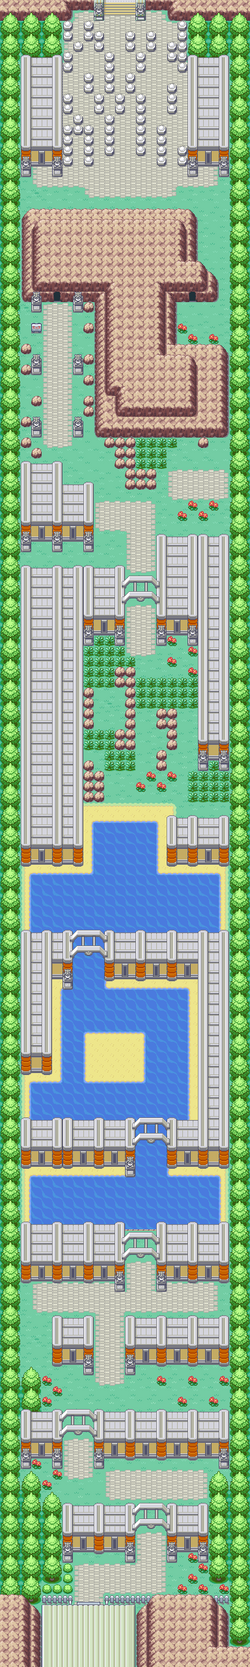 Pokémon FireRed and LeafGreen/Pewter City — StrategyWiki